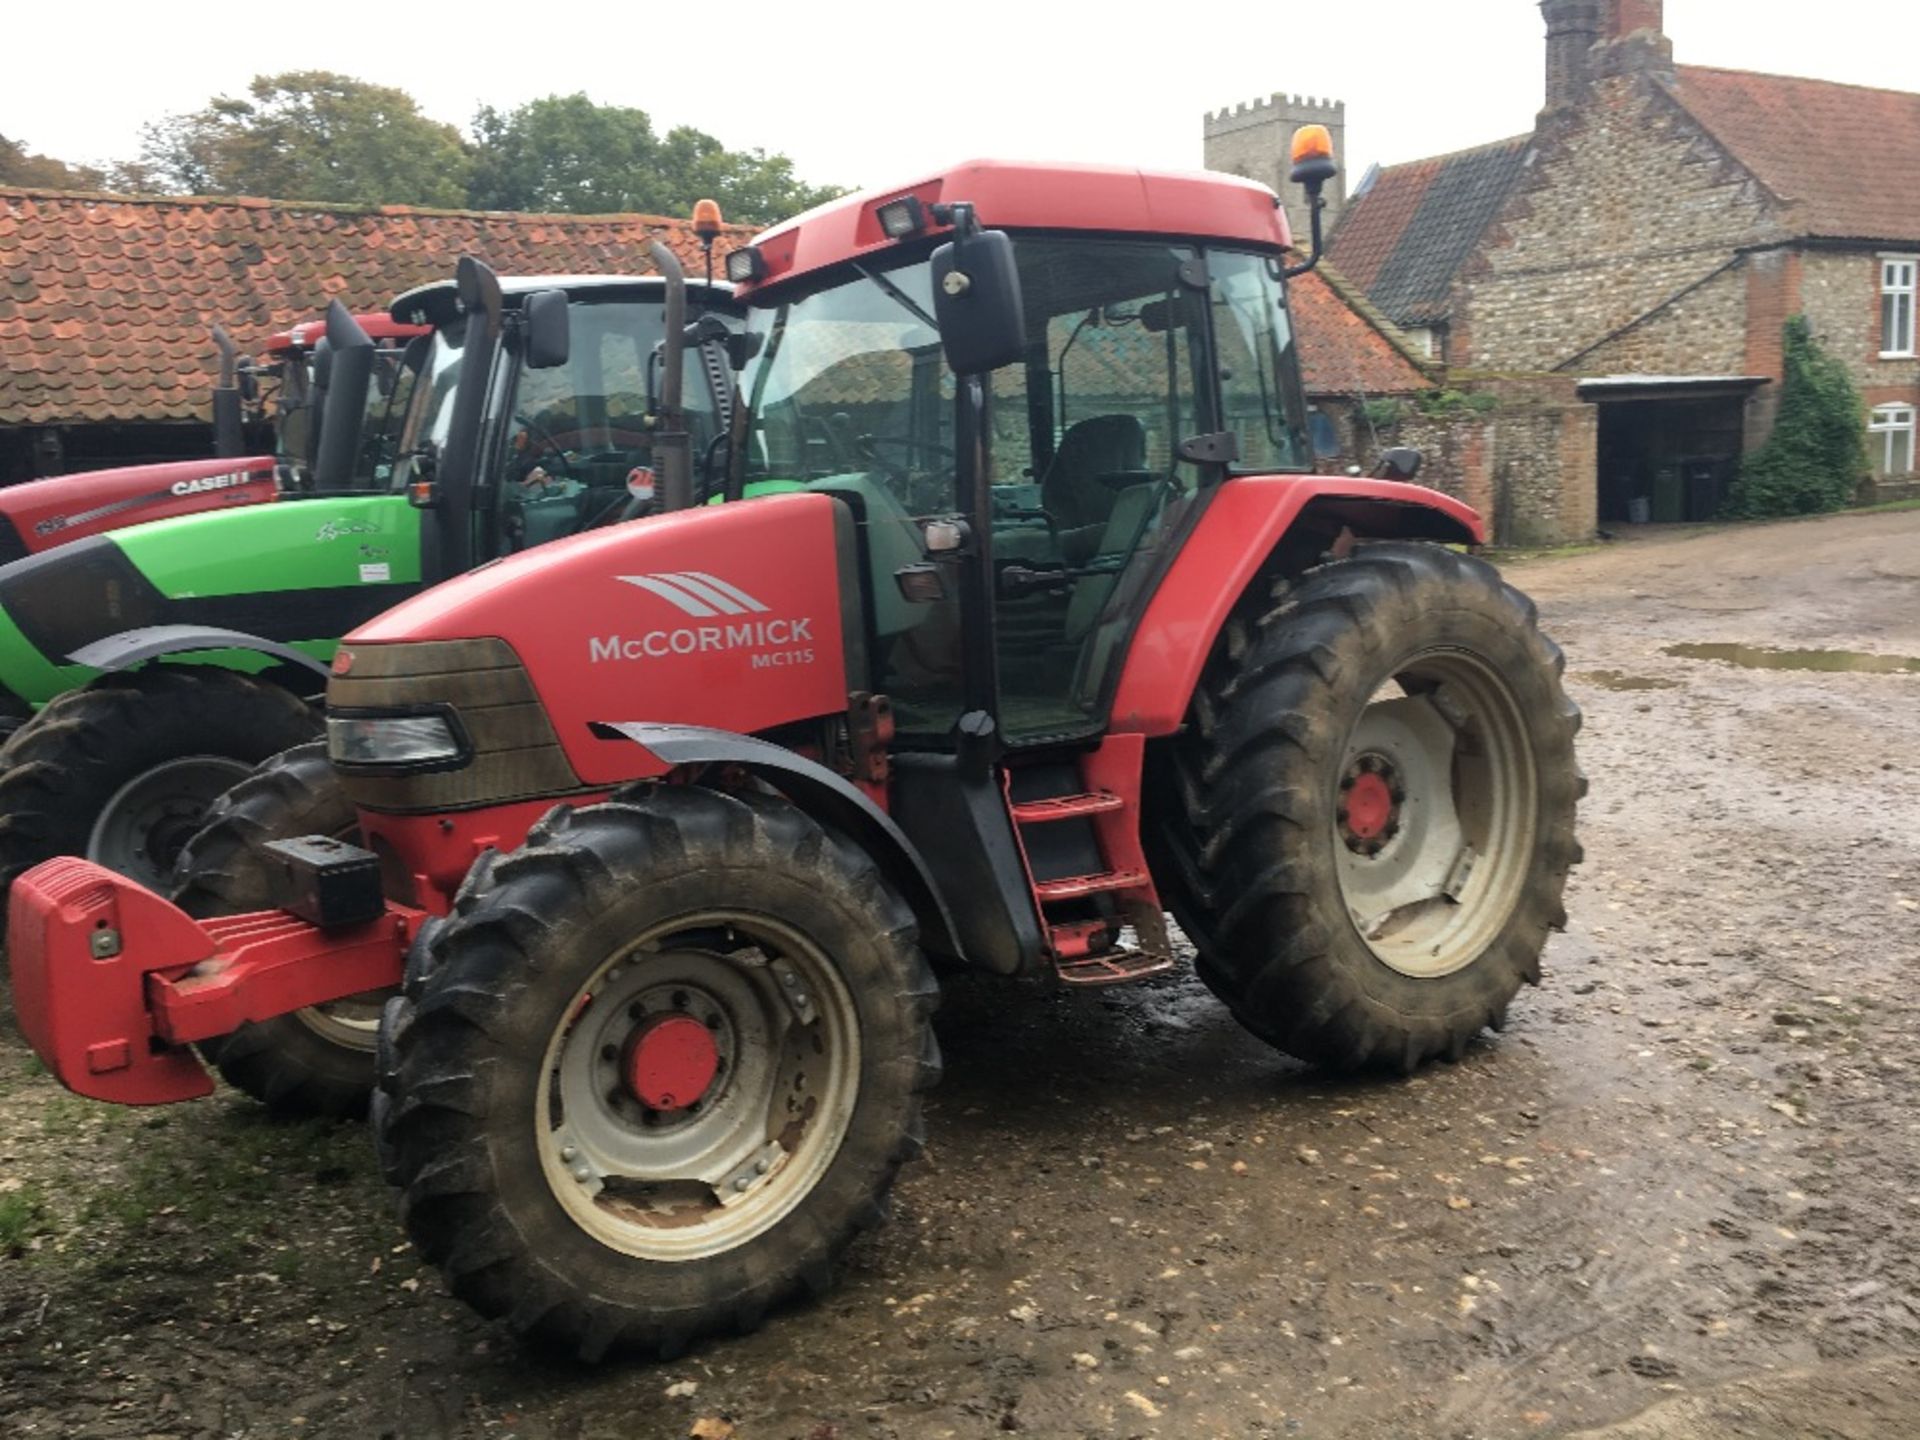 2003 McCormick MC115 tractor, front wafer weights, Rear Tyres: 12.4 R46, Front Tyres: 270/95 R32. - Image 2 of 4